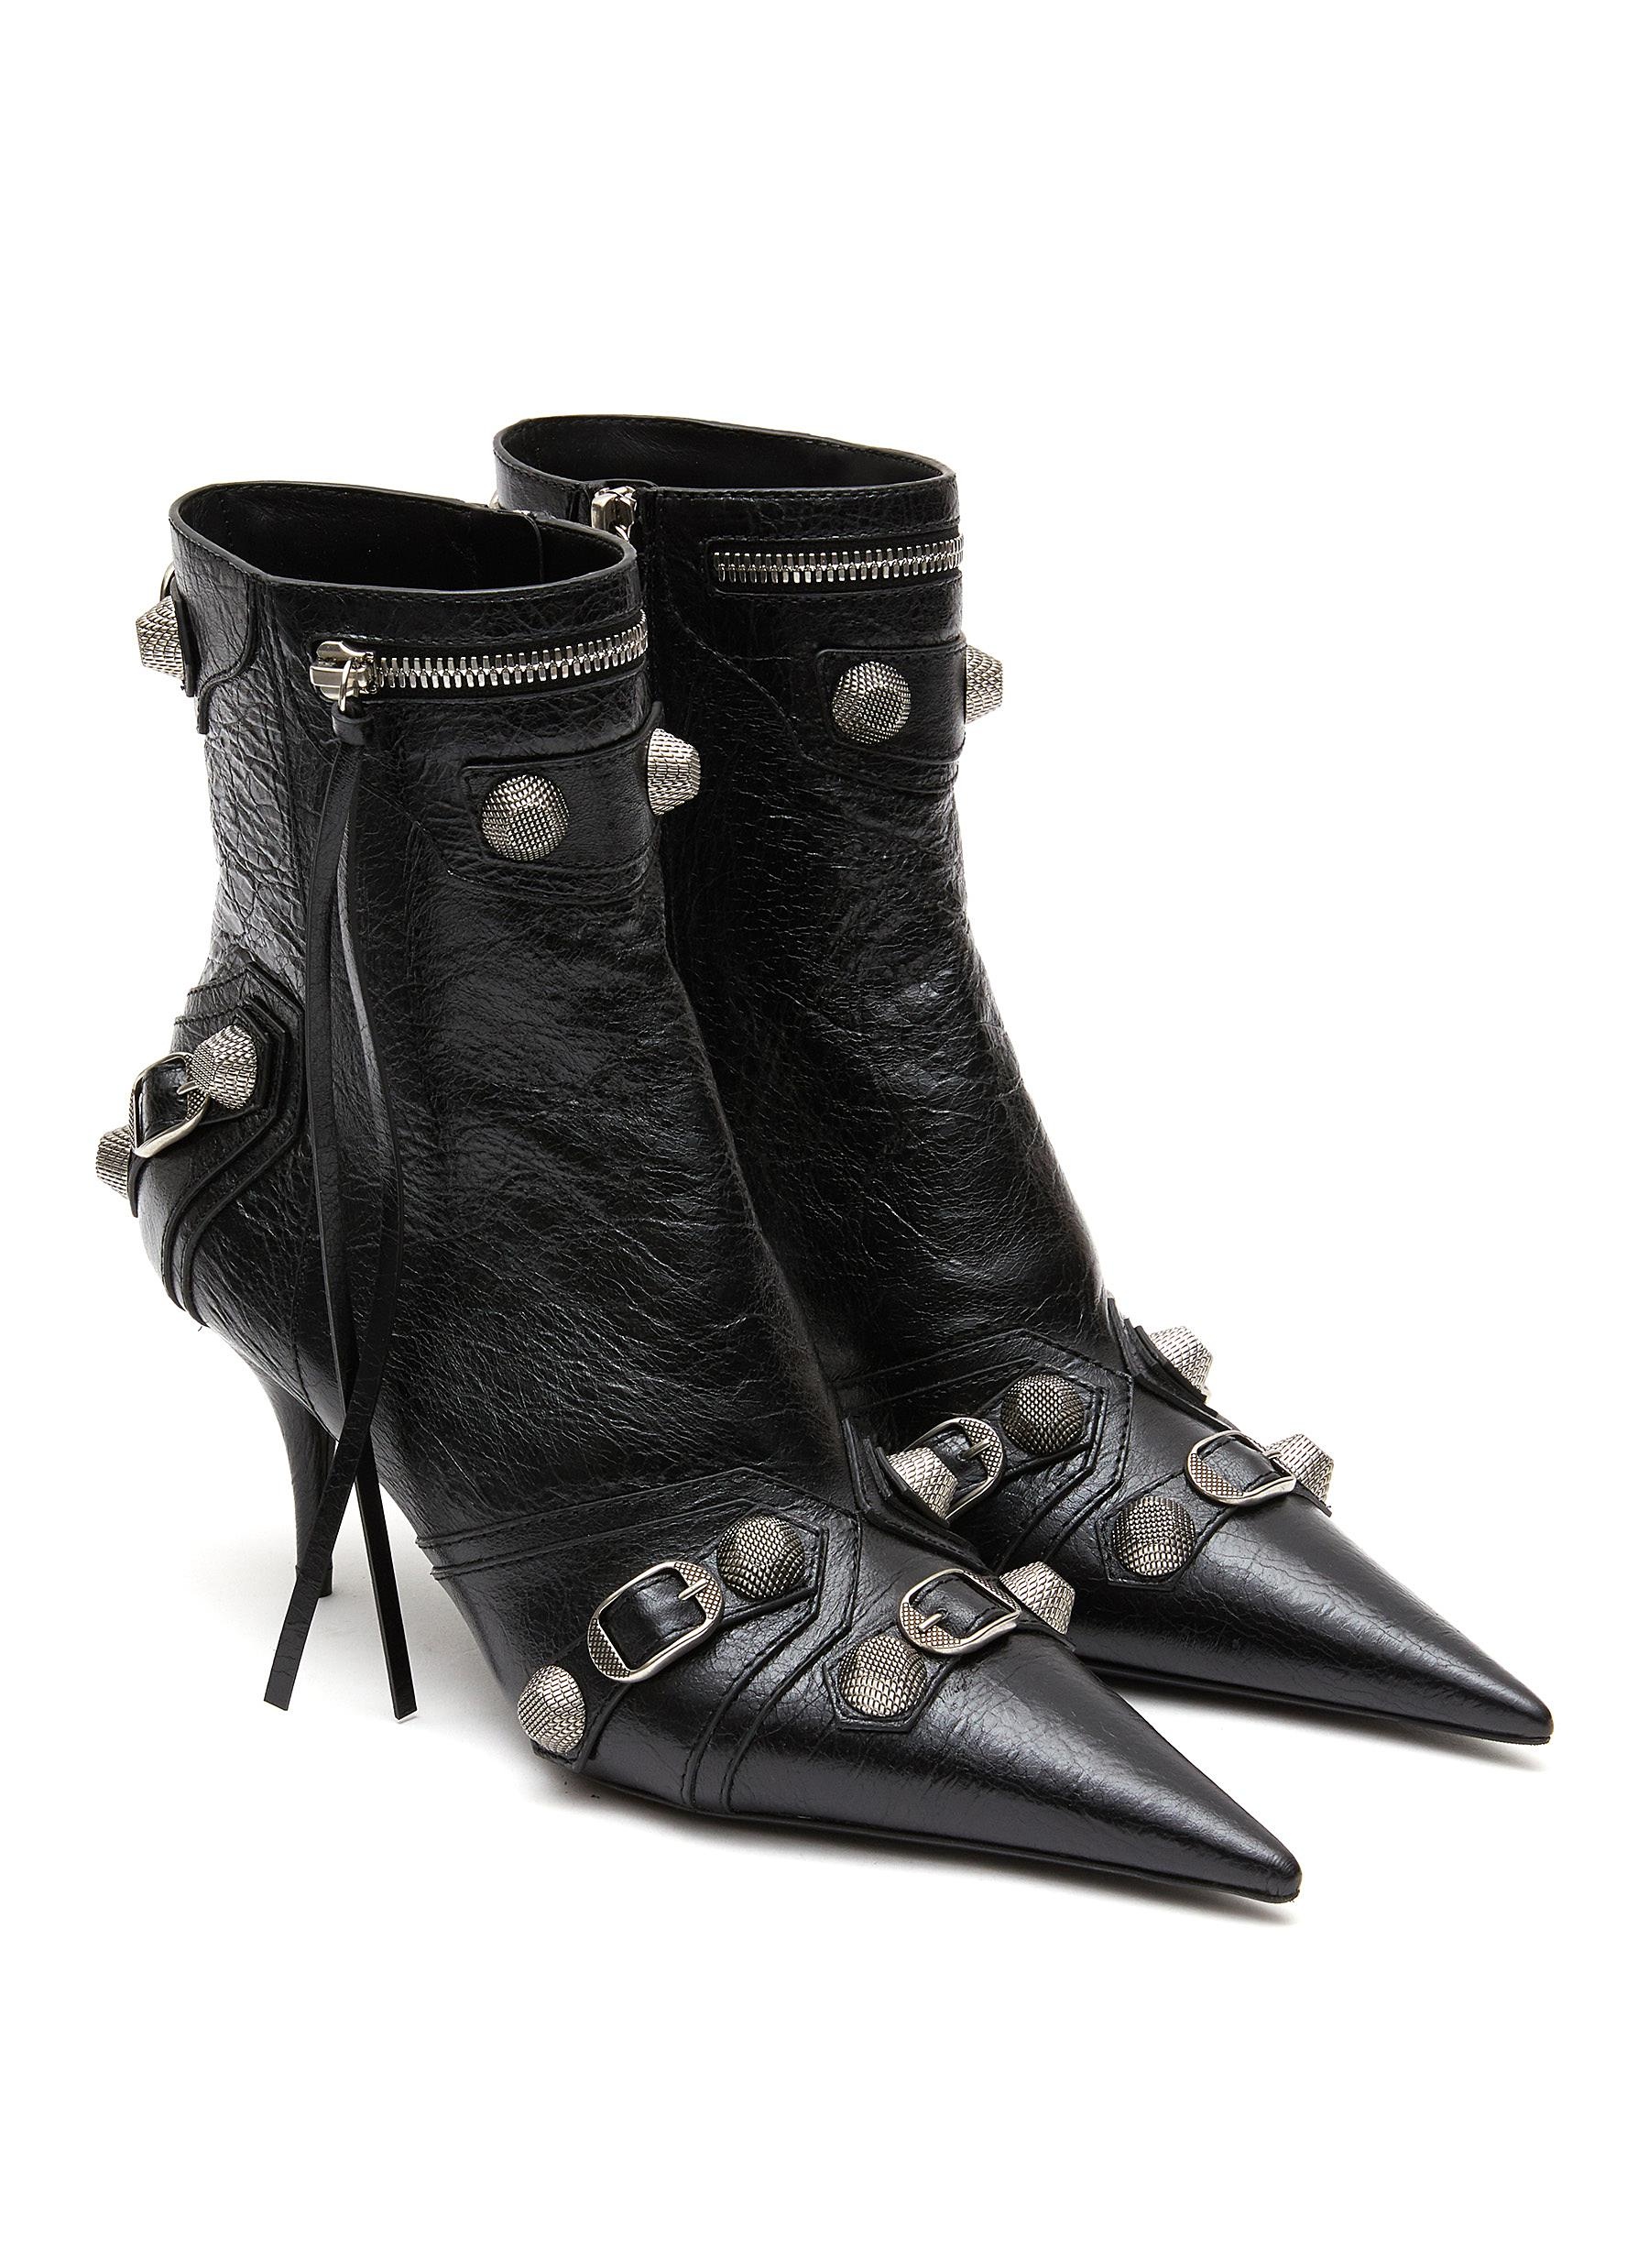 ‘CAGOLE’ METAL STUD POINTED TOE LEATHER HEELED BOOTS - 3